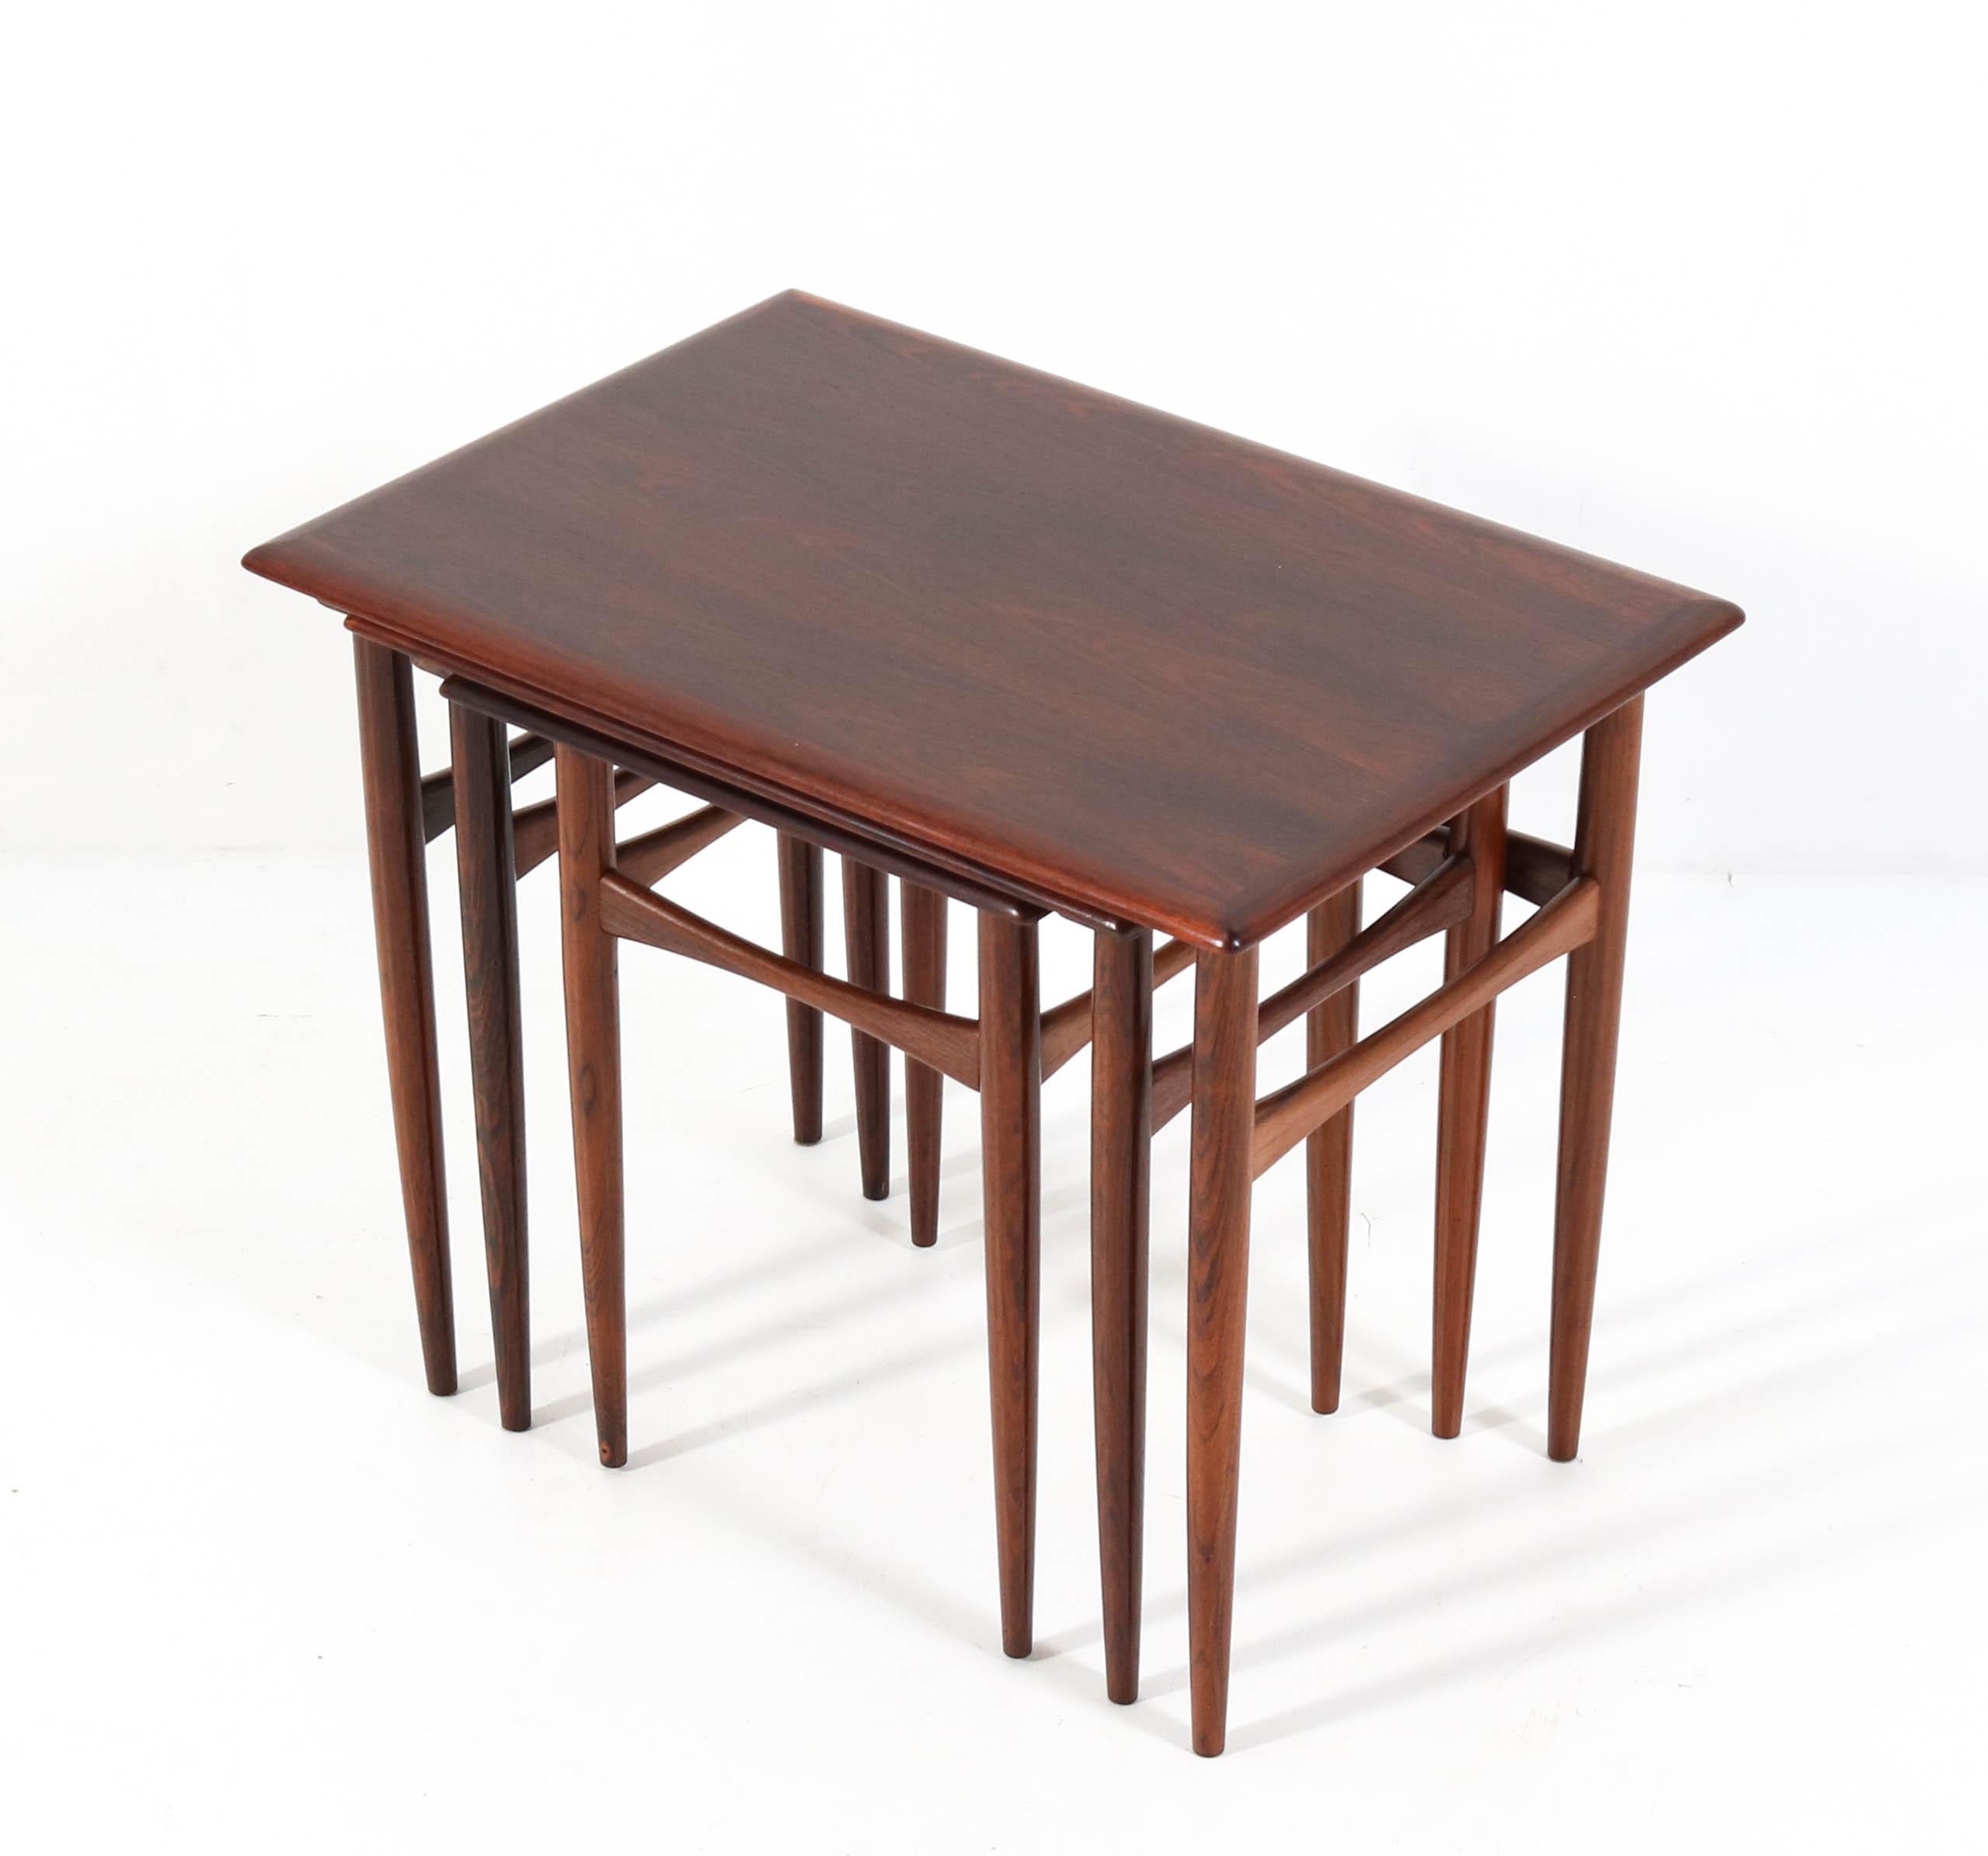 Wonderful set of three Mid-Century Modern nesting tables.
Design by Arne Hovmand Olsen.
Striking Danish design from the 1960s.
Solid rosewood nicely shaped legs with original rosewood veneered tops.
In very good refinished condition with a